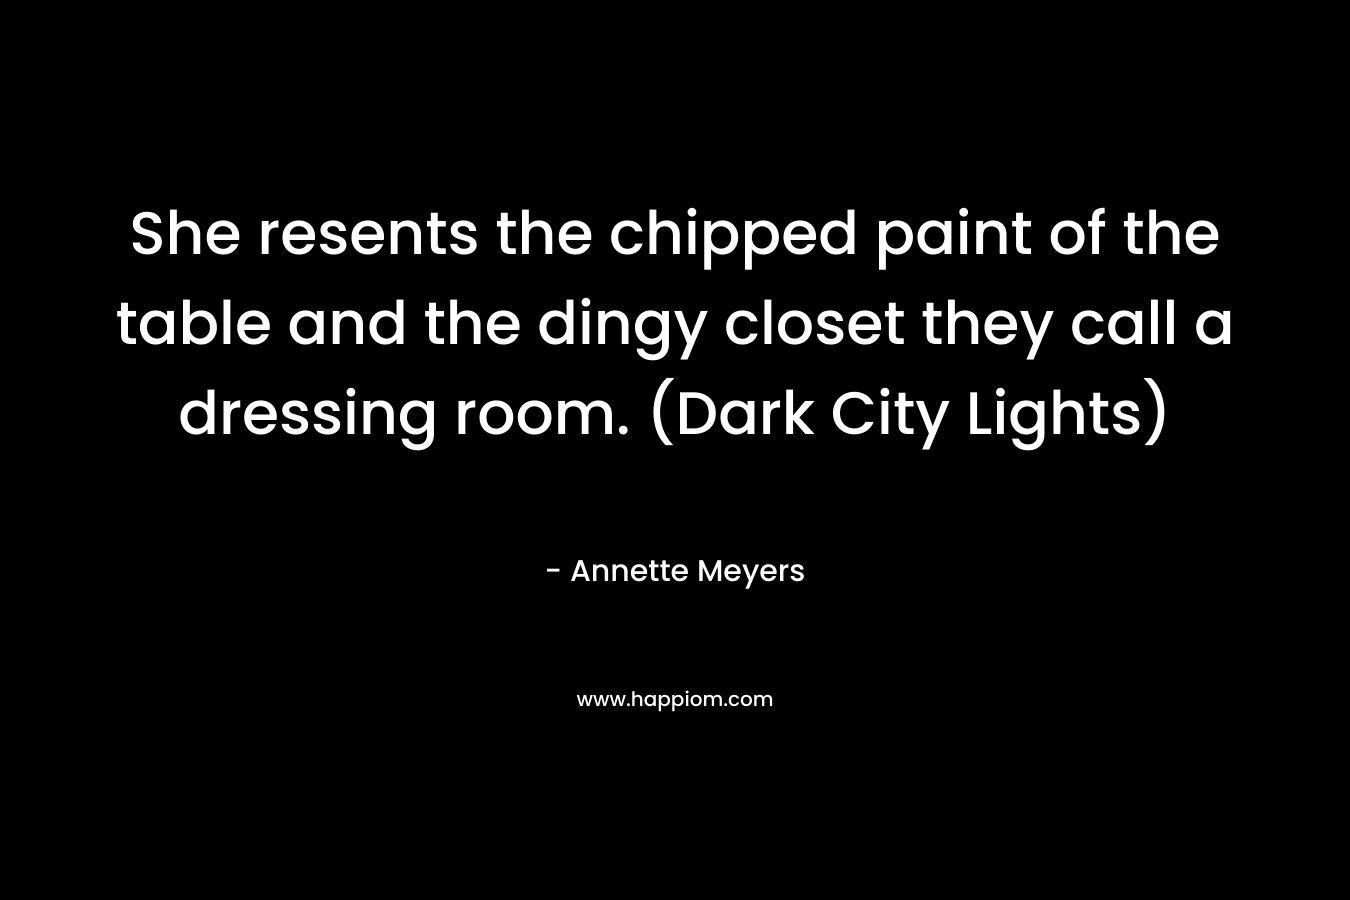 She resents the chipped paint of the table and the dingy closet they call a dressing room. (Dark City Lights)